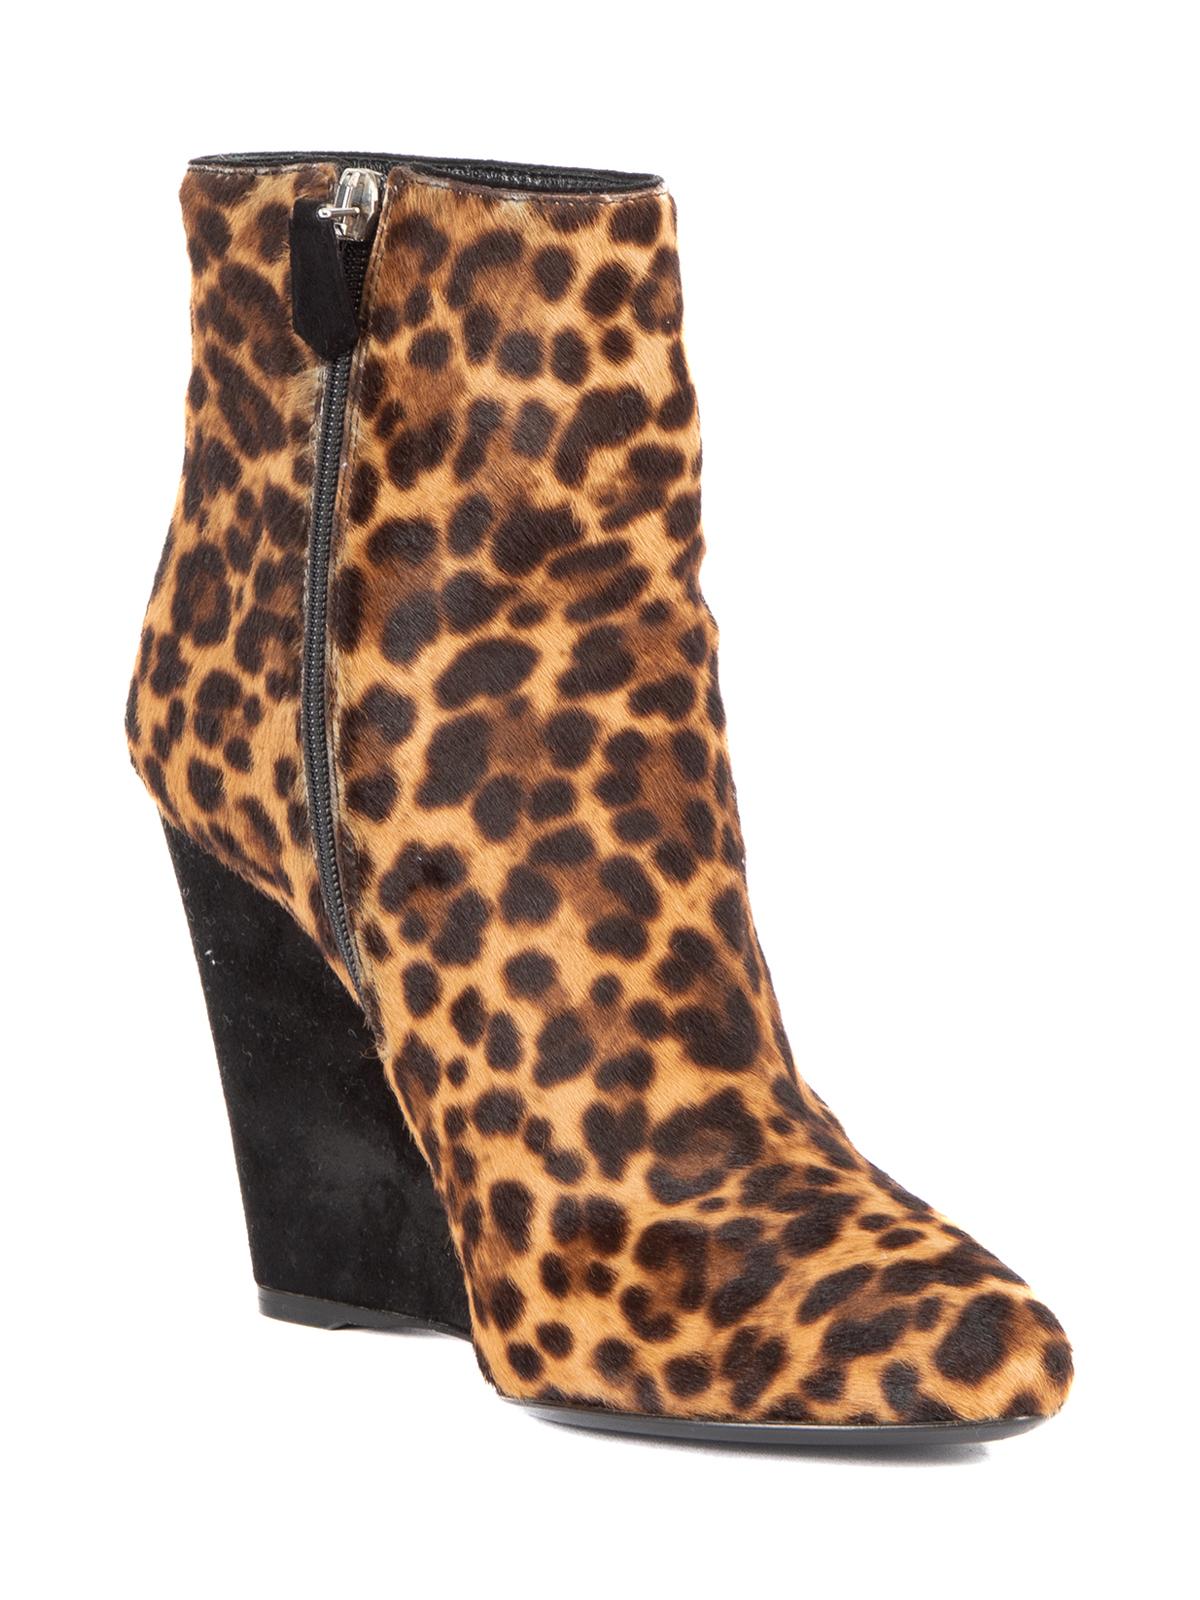 CONDITION is Very good. Hardly any visible wear to boots is evident on this used Prada designer resale item. Details Leopard print Pony hair calfskin Black suede wedge heel Point toe Side zip with black suede tag Comes with original Prada dust bags